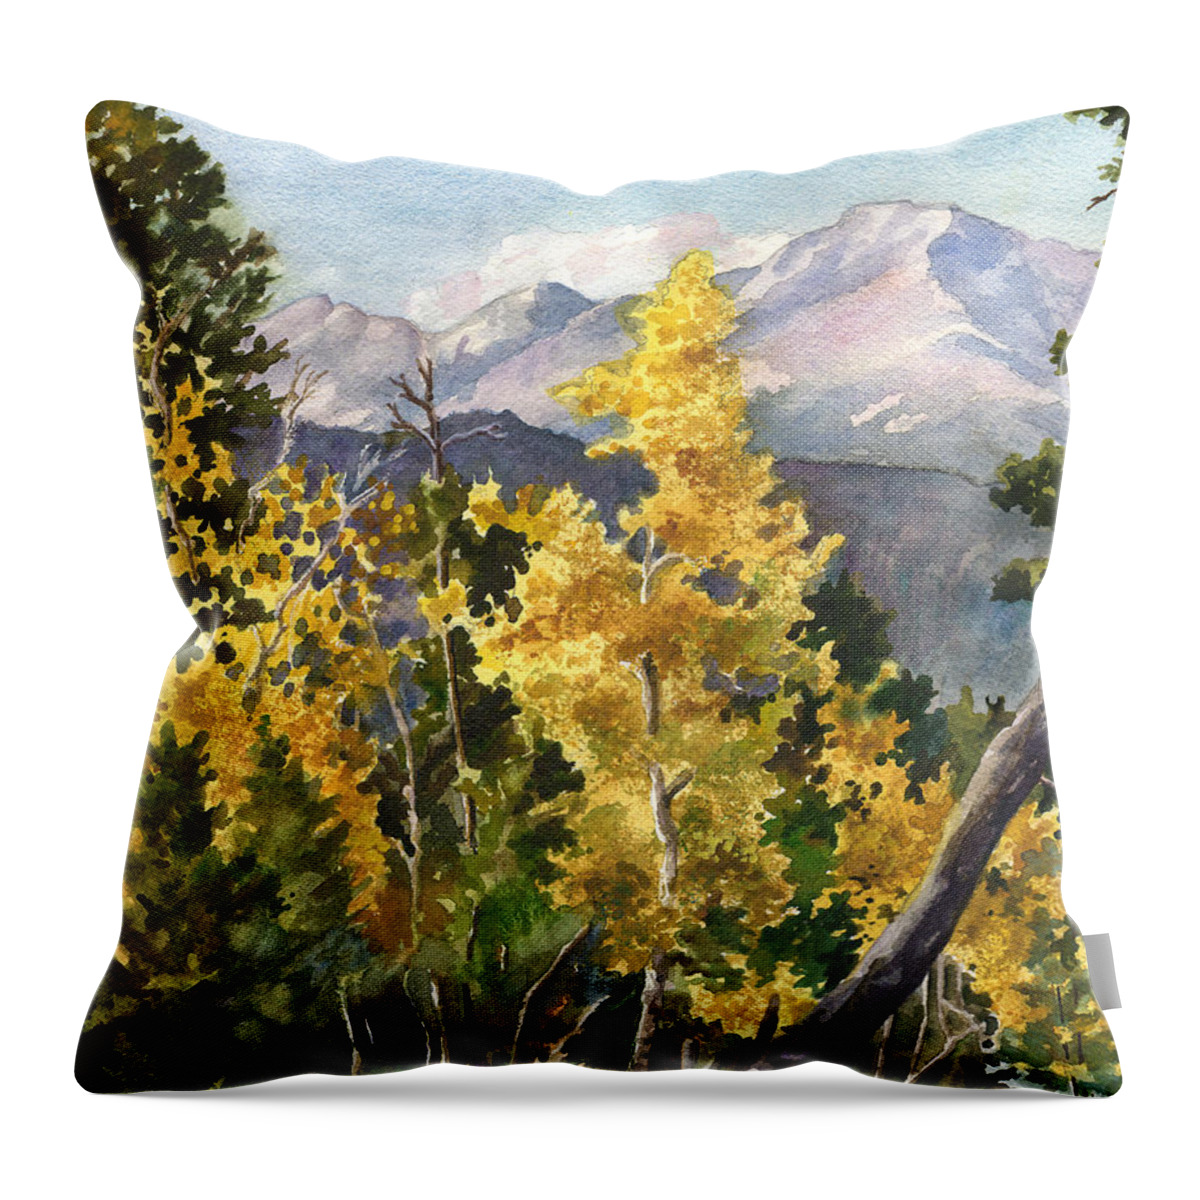 Colorado Rocky Mountains Painting Throw Pillow featuring the painting Chief's Head Mountain by Anne Gifford